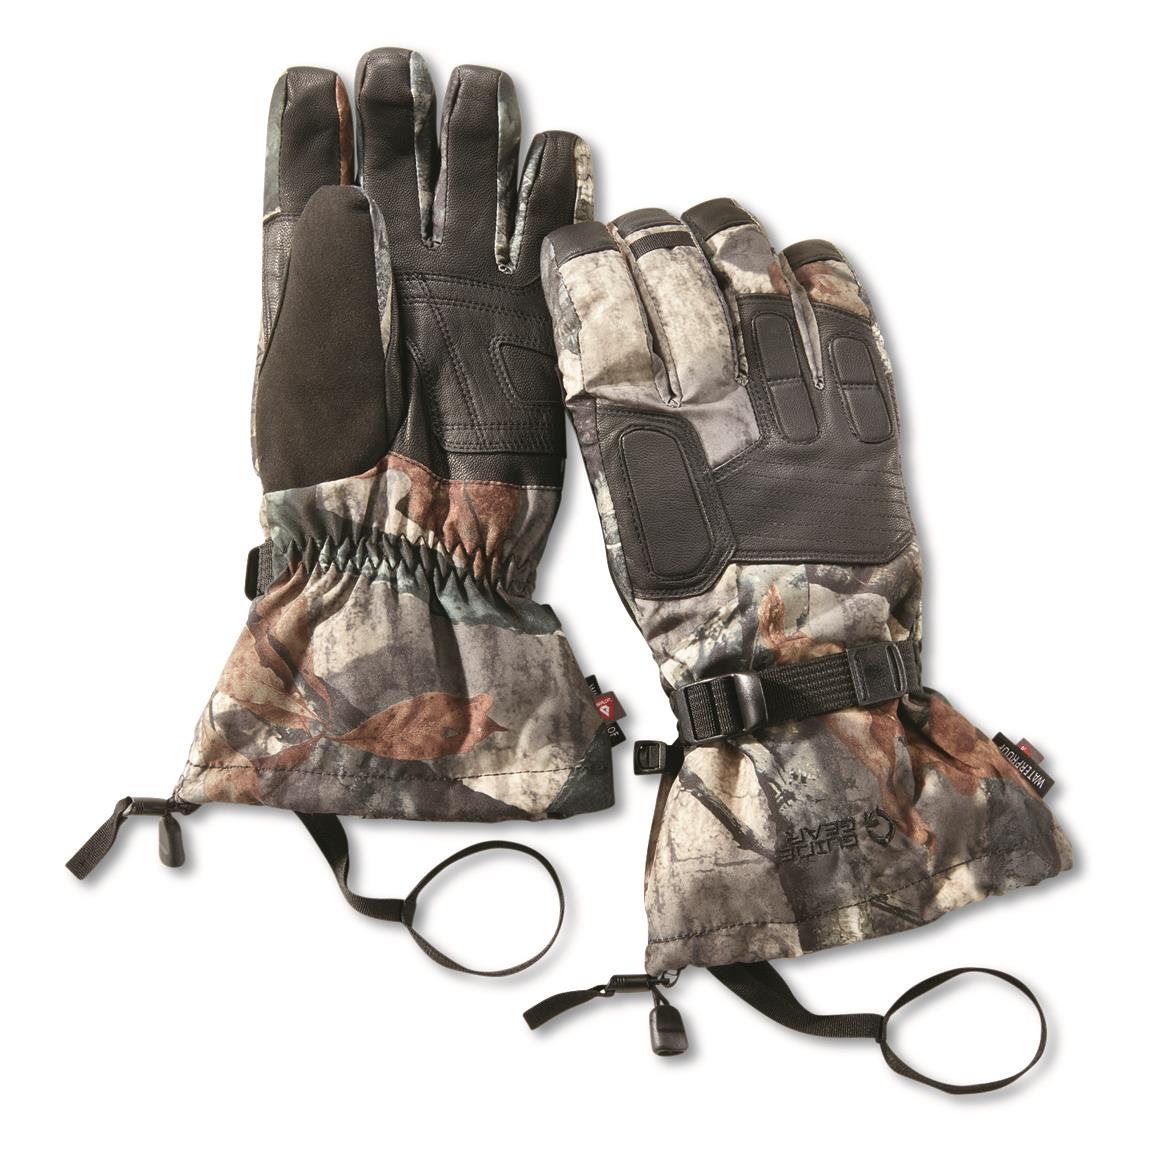 Wrist strap and quick-release cord lock, Mossy Oak Treestand®